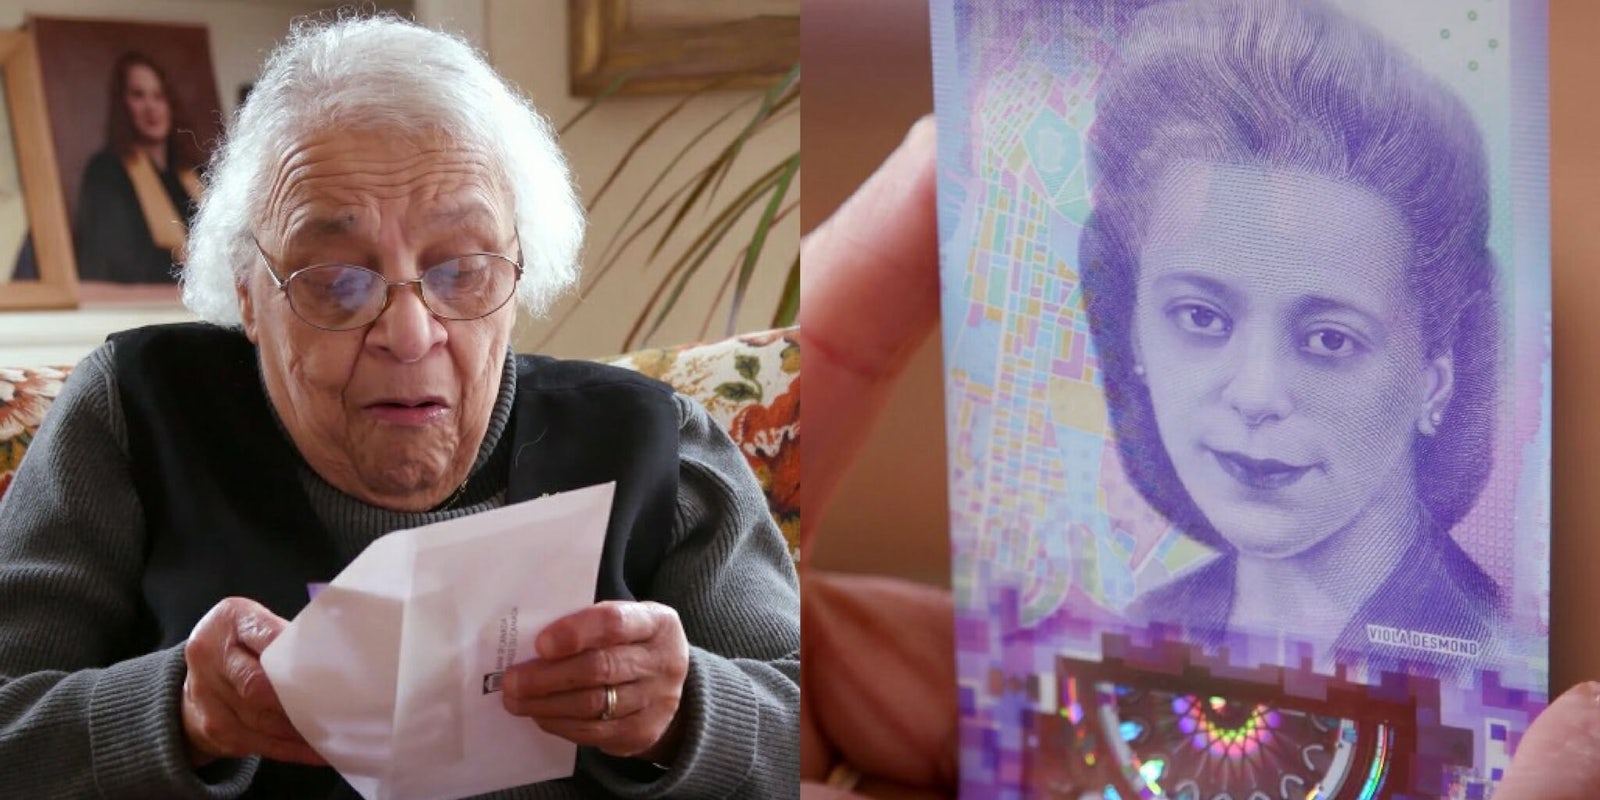 Viola Desmond's sister Wanda Robson sees Desmond on Canada's $10 note for the first time.